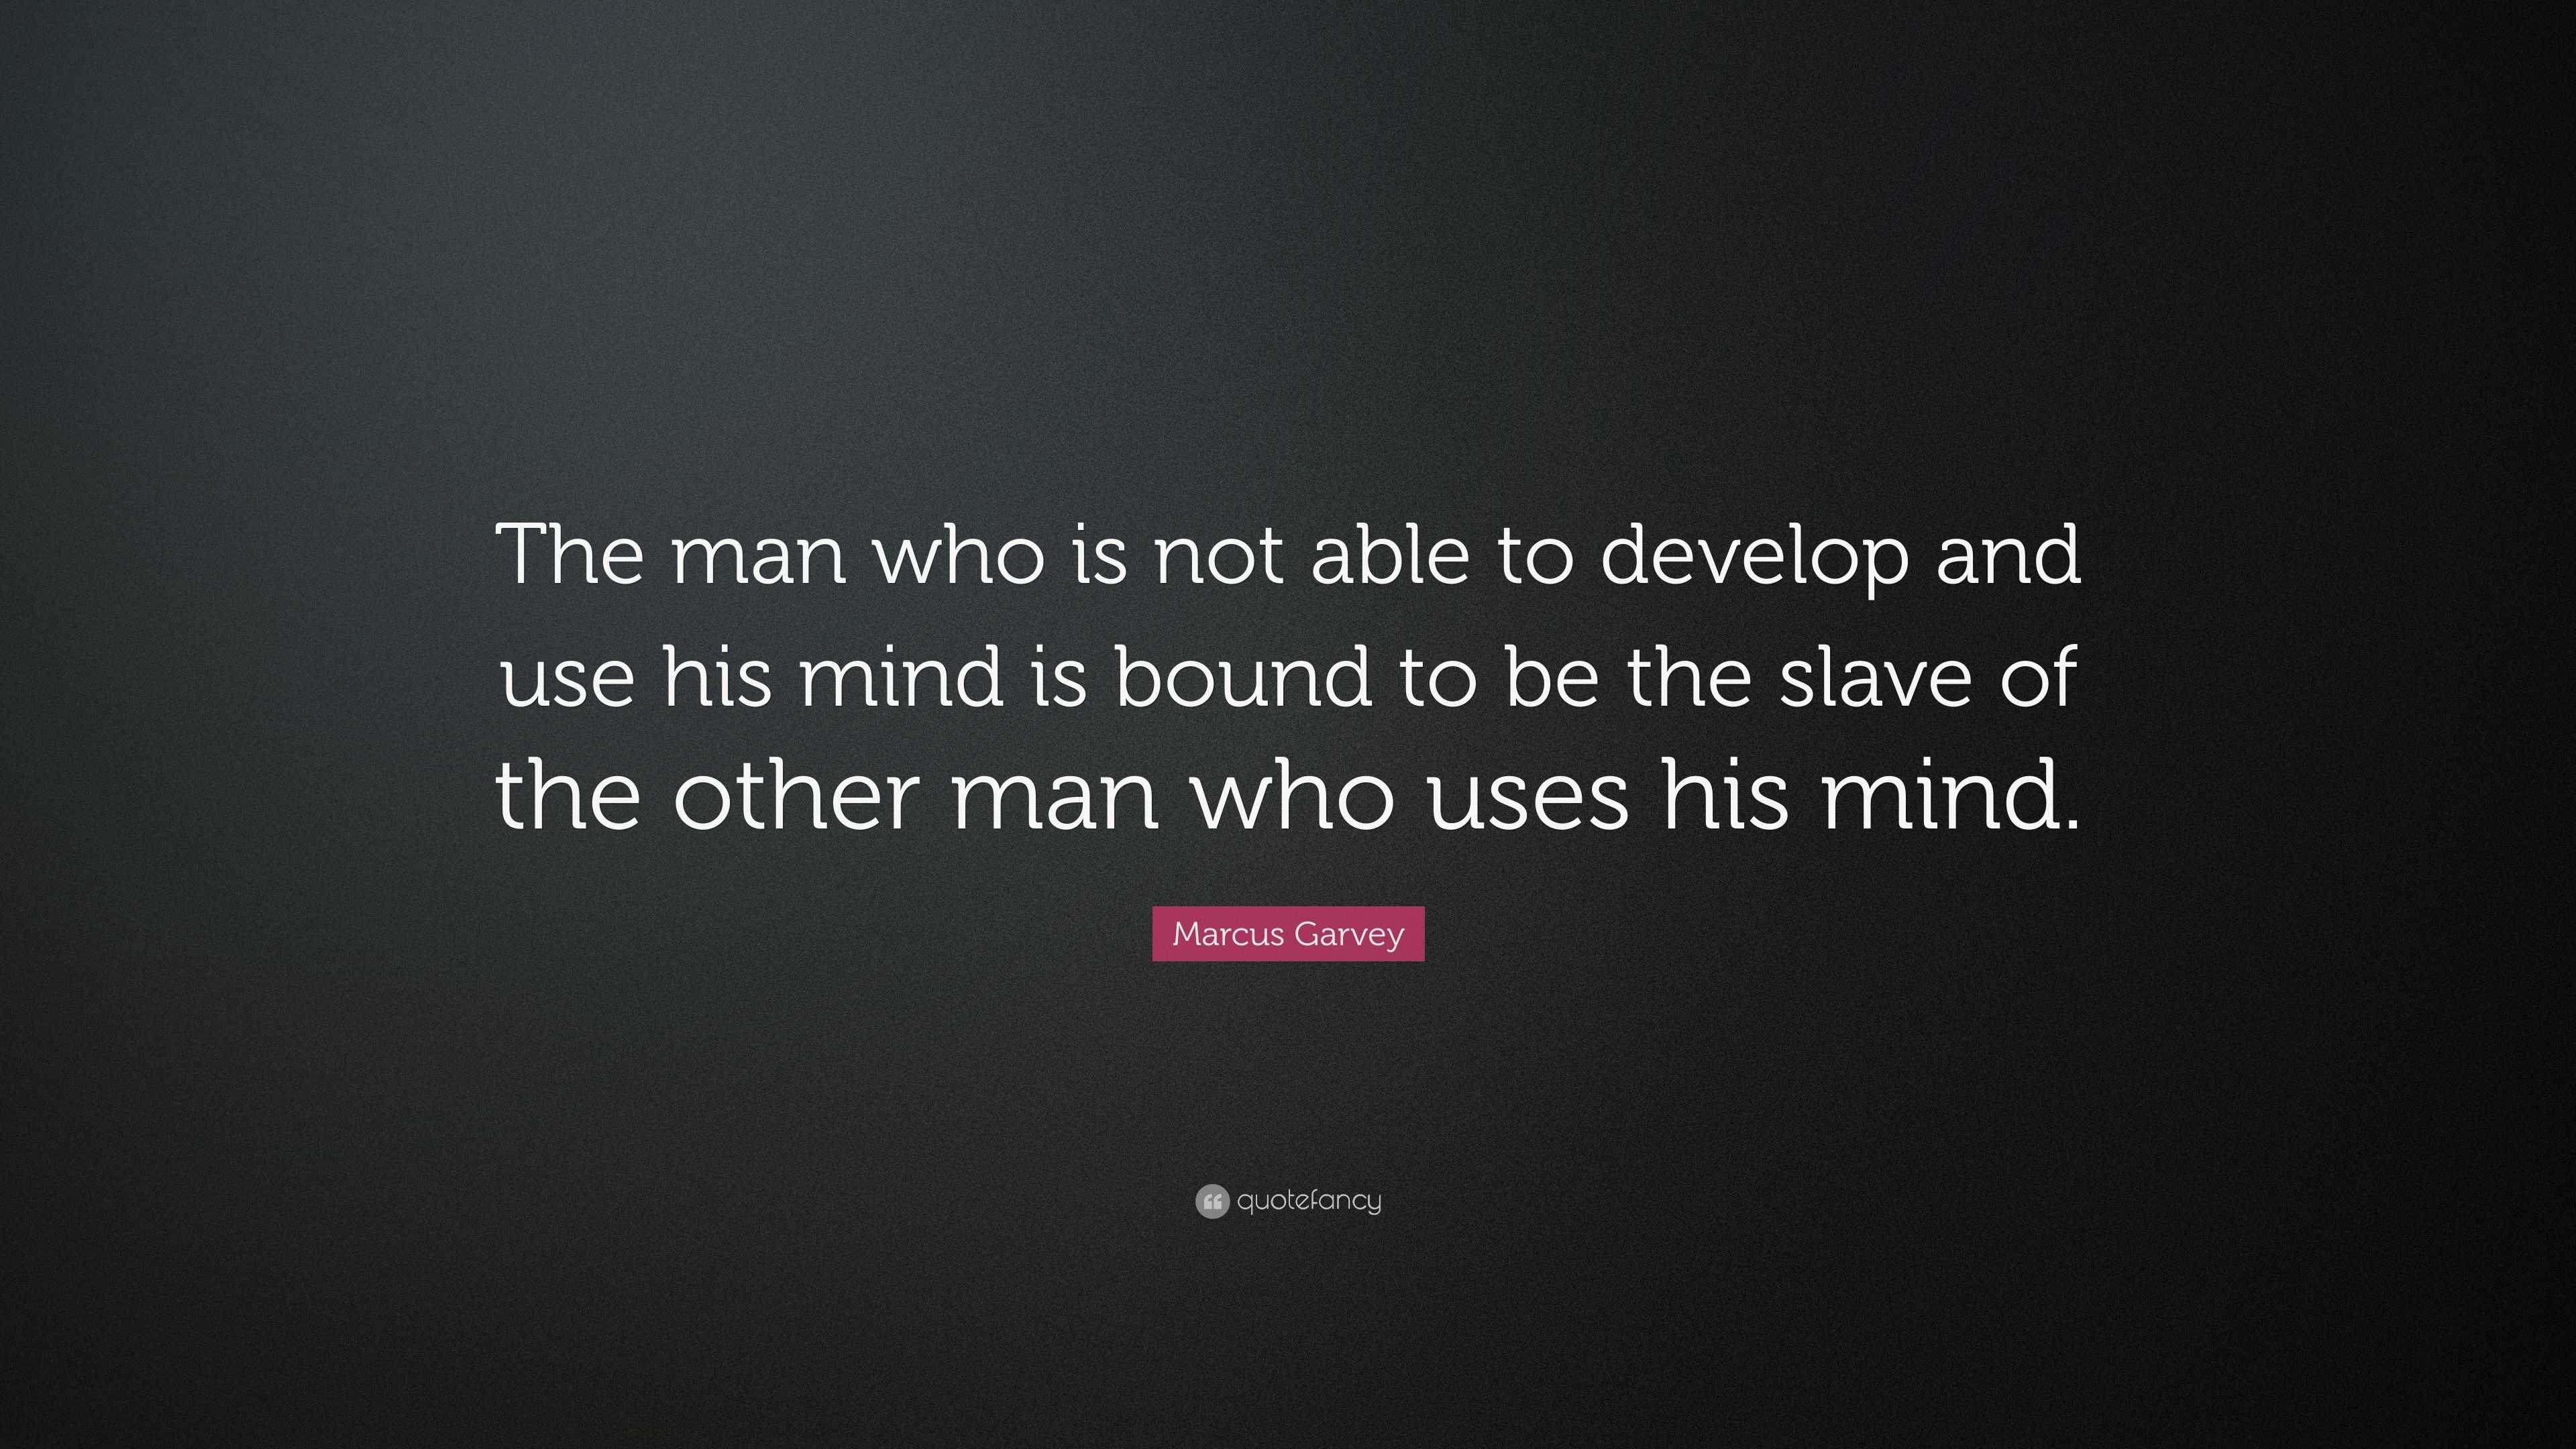 Marcus Garvey Quote: “The man who is not able to develop and use his ...